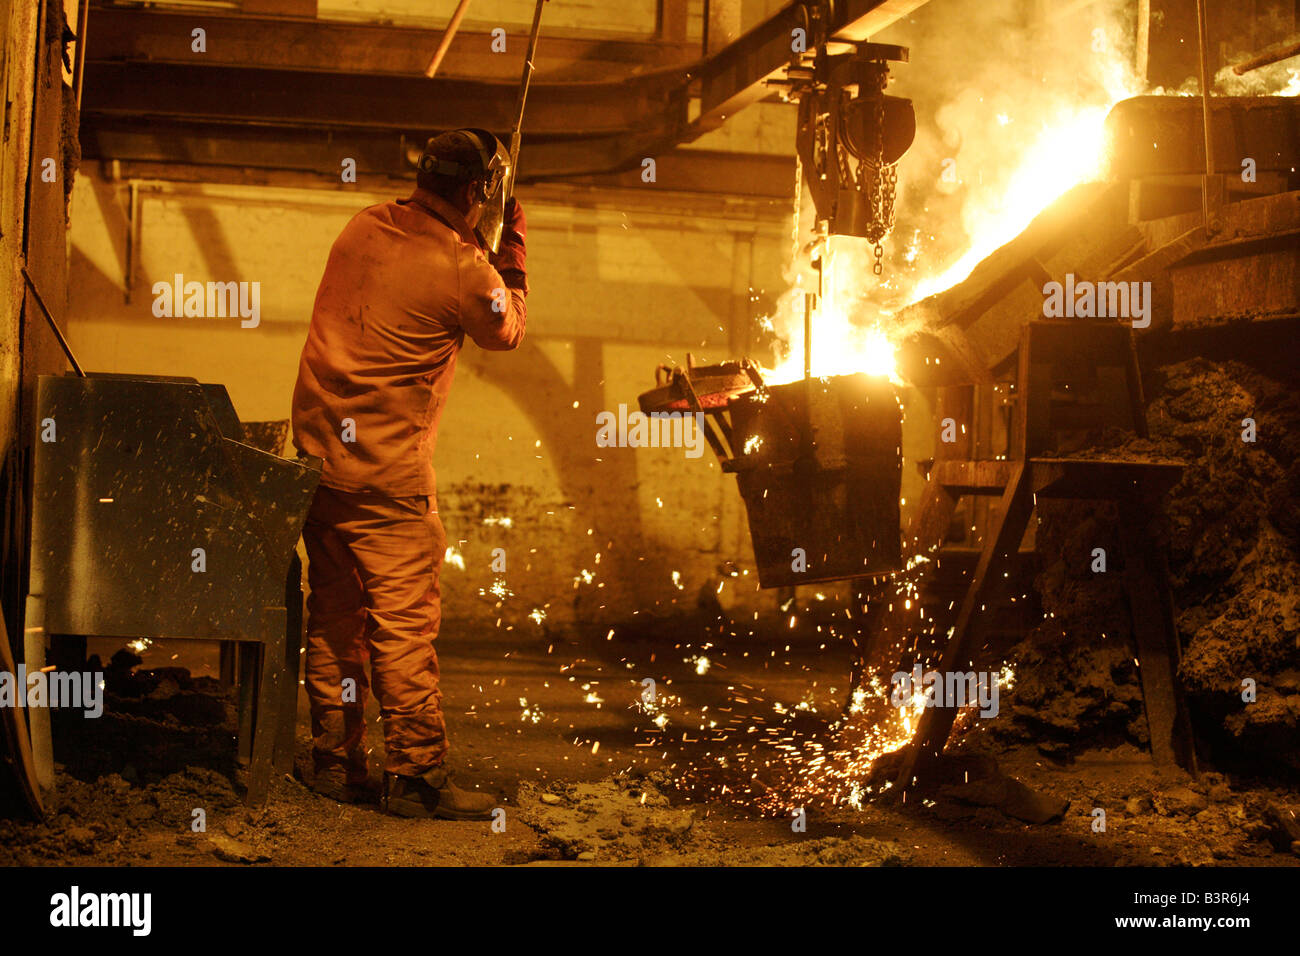 Chamberlin Hill Castings Ltd in Walsall West Midlands, Regno Unito Foto Stock